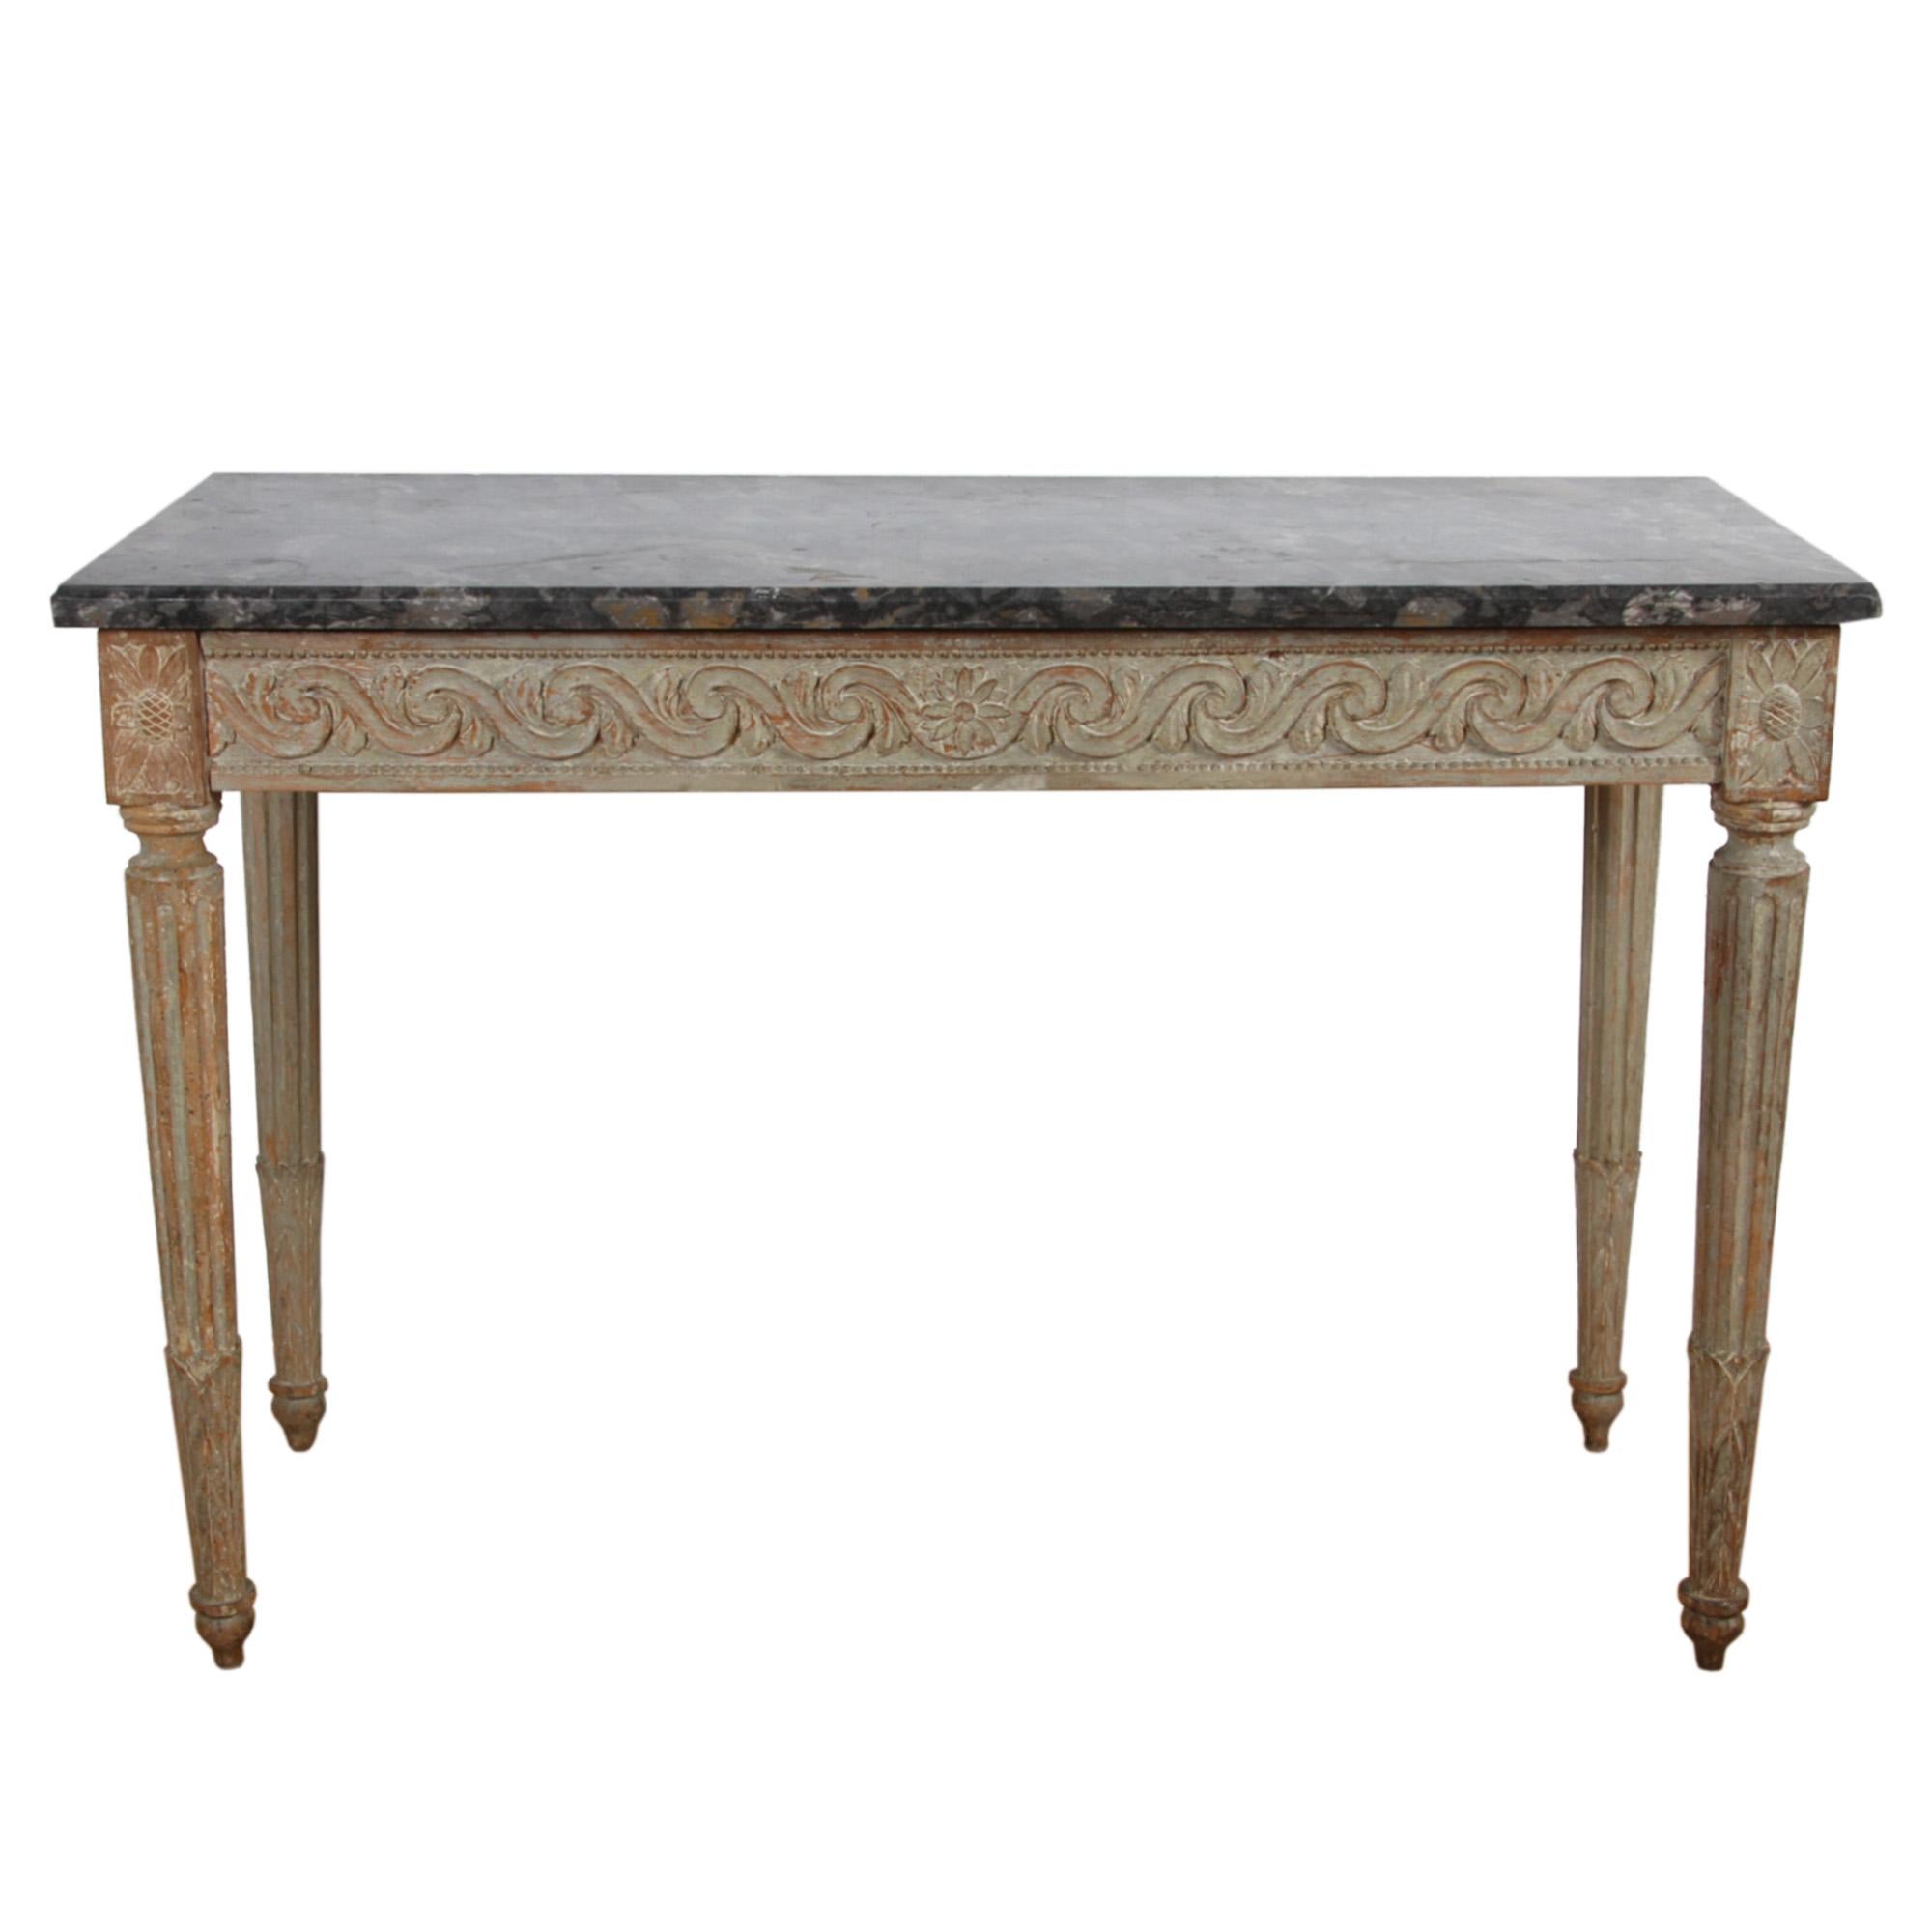 This is an exceptional console table, made in France in the 18th century.

The base has lovely carved detail and it has a lovely original thick fossil marble top. 
